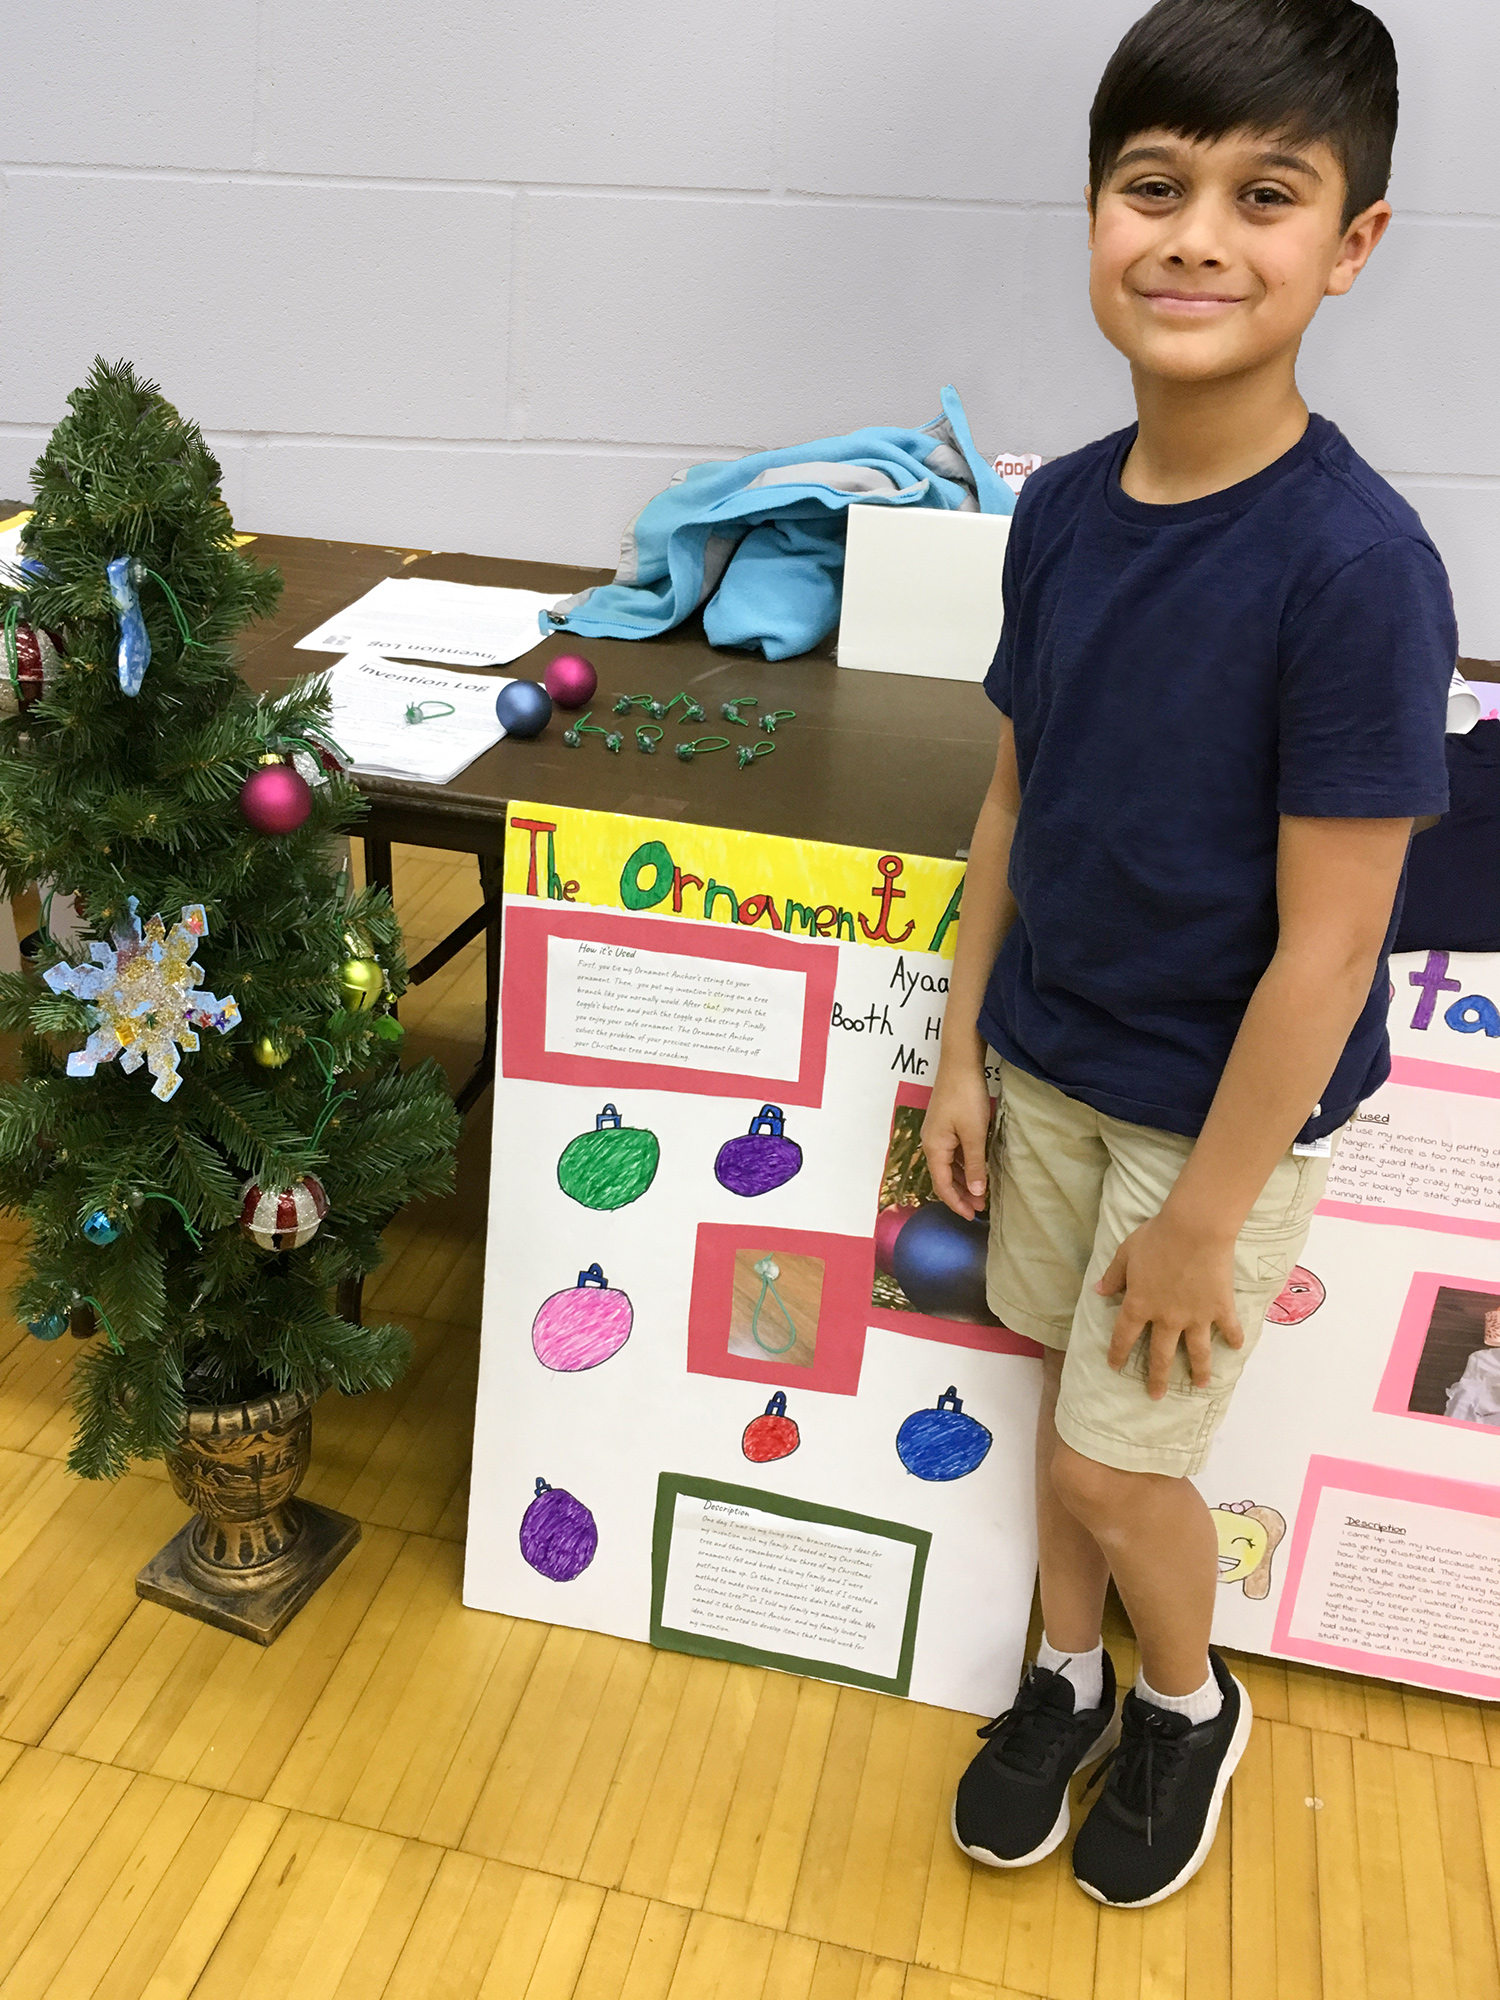 A boy stands next to his project about Ornament Anchor. Near him is a small Christmas tree with ornaments, a poster display and a table with ornaments.